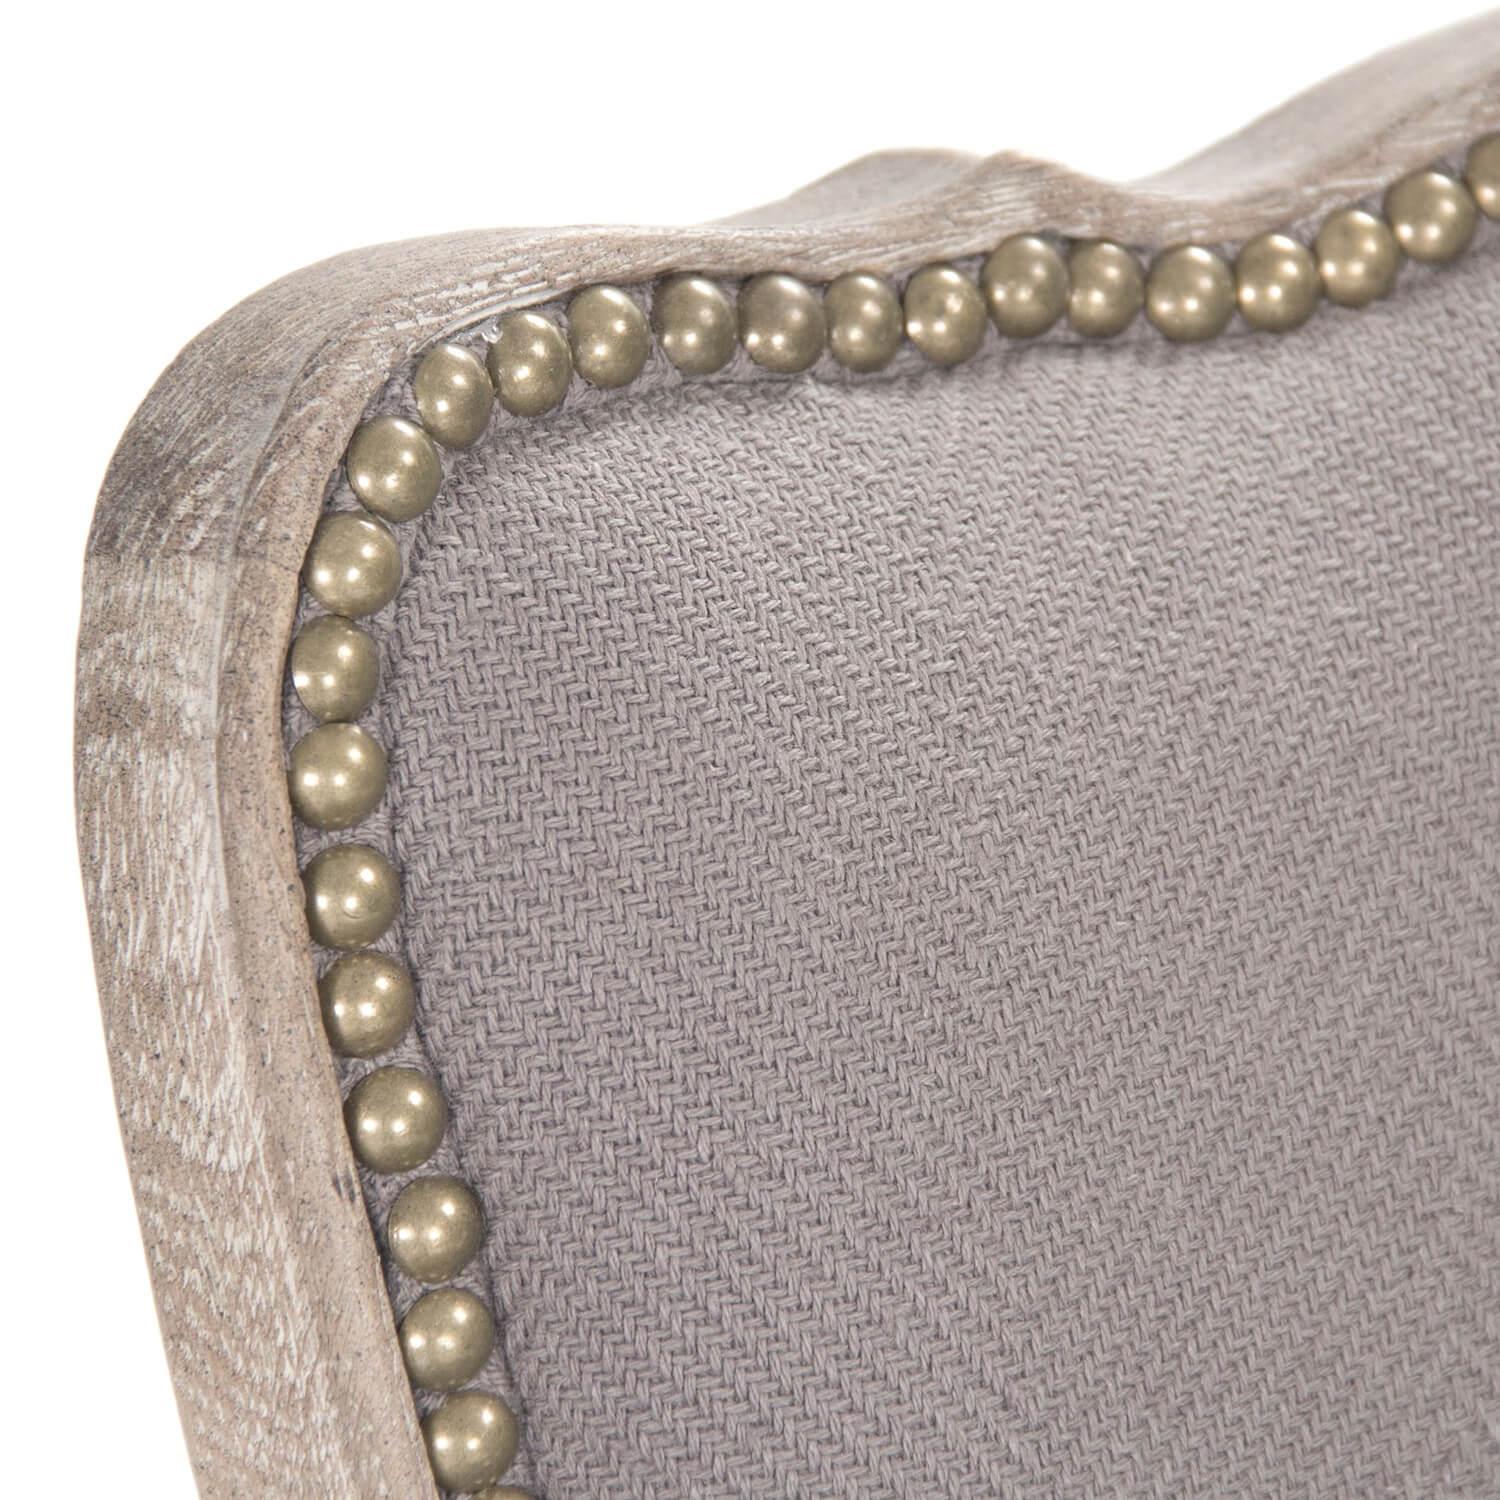 Elise French Gray Arm Chairs - Belle Escape